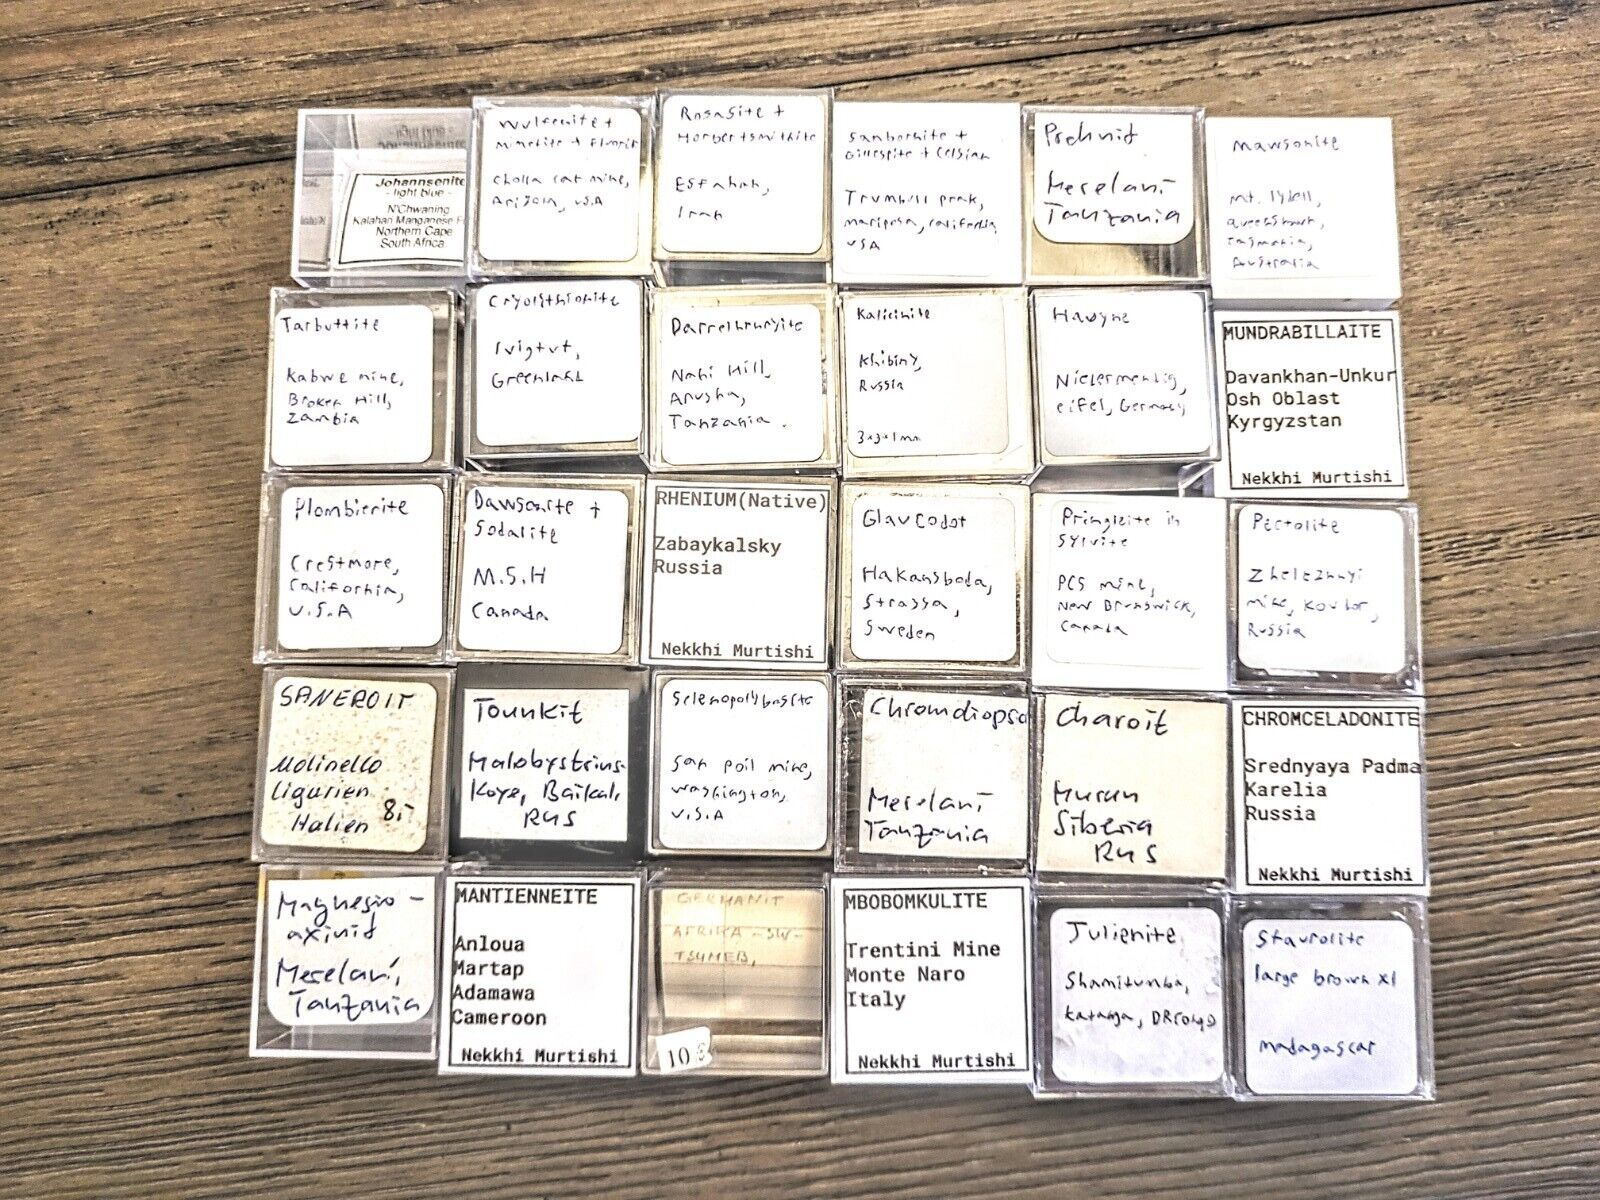 COLLECTION OF 30 DIFFERENT MICROMOUNT SPECIMENS ALL VERY RARE AND GOOD QUALITY